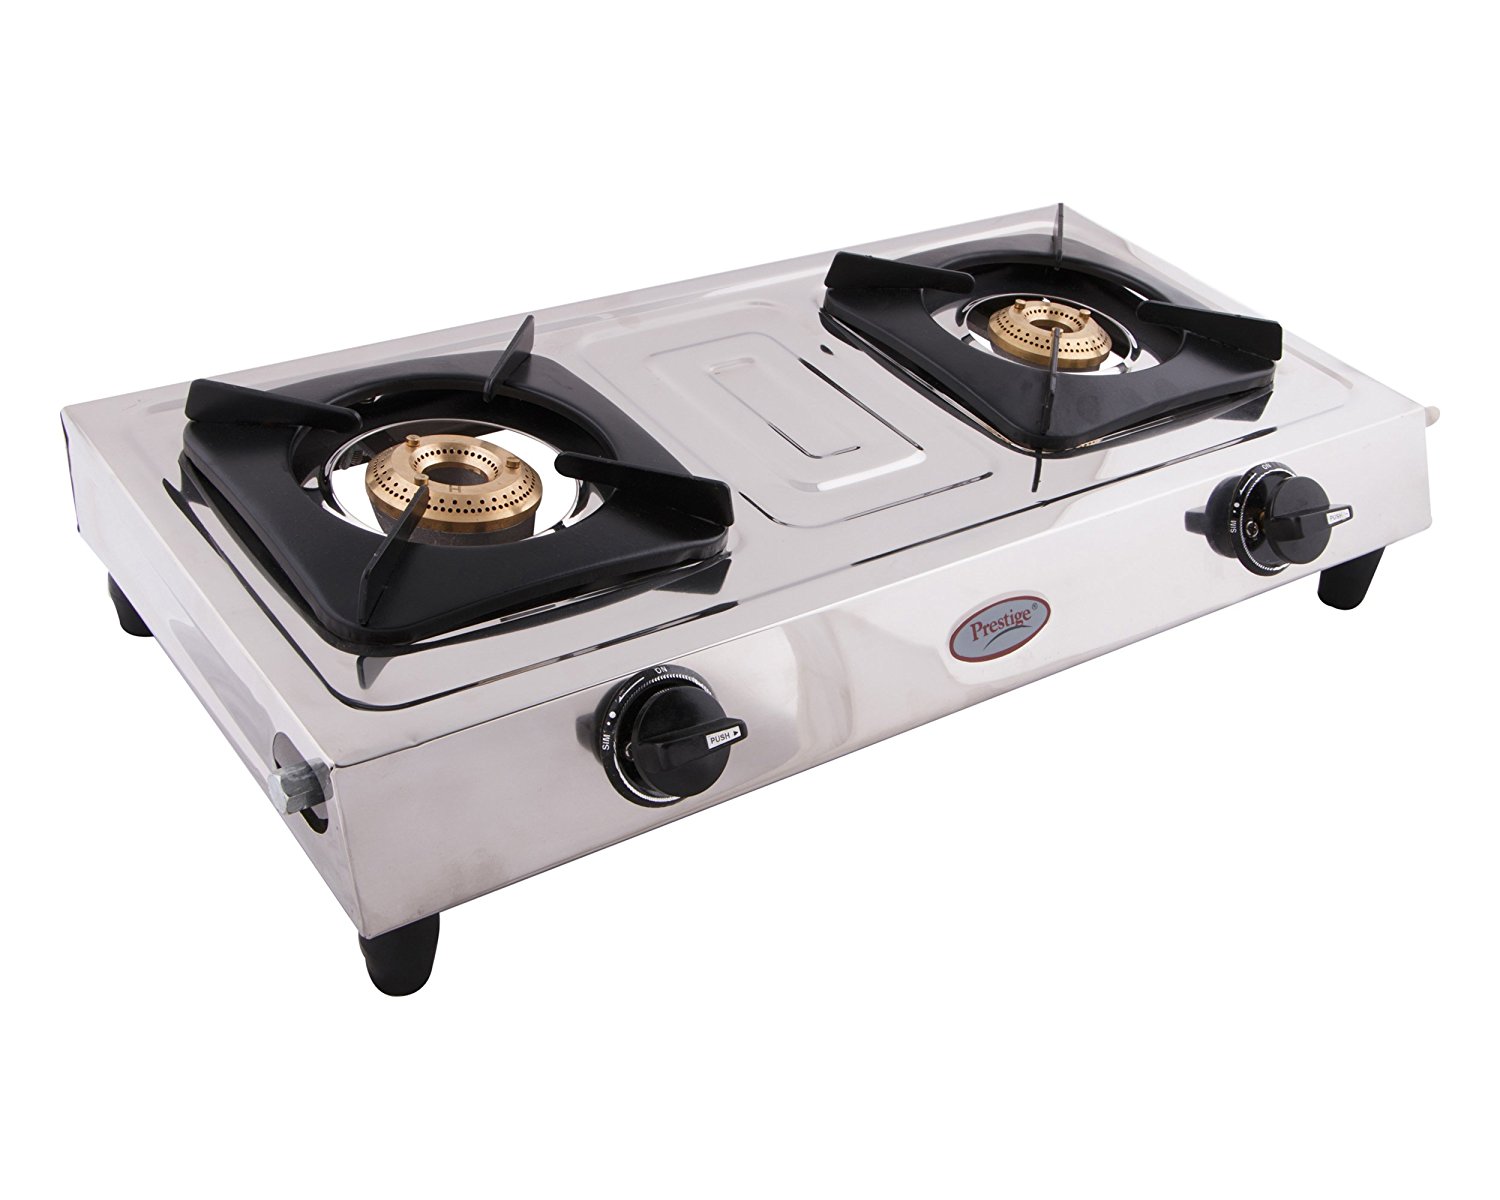 Iceland Gas Fuel Stove wind p